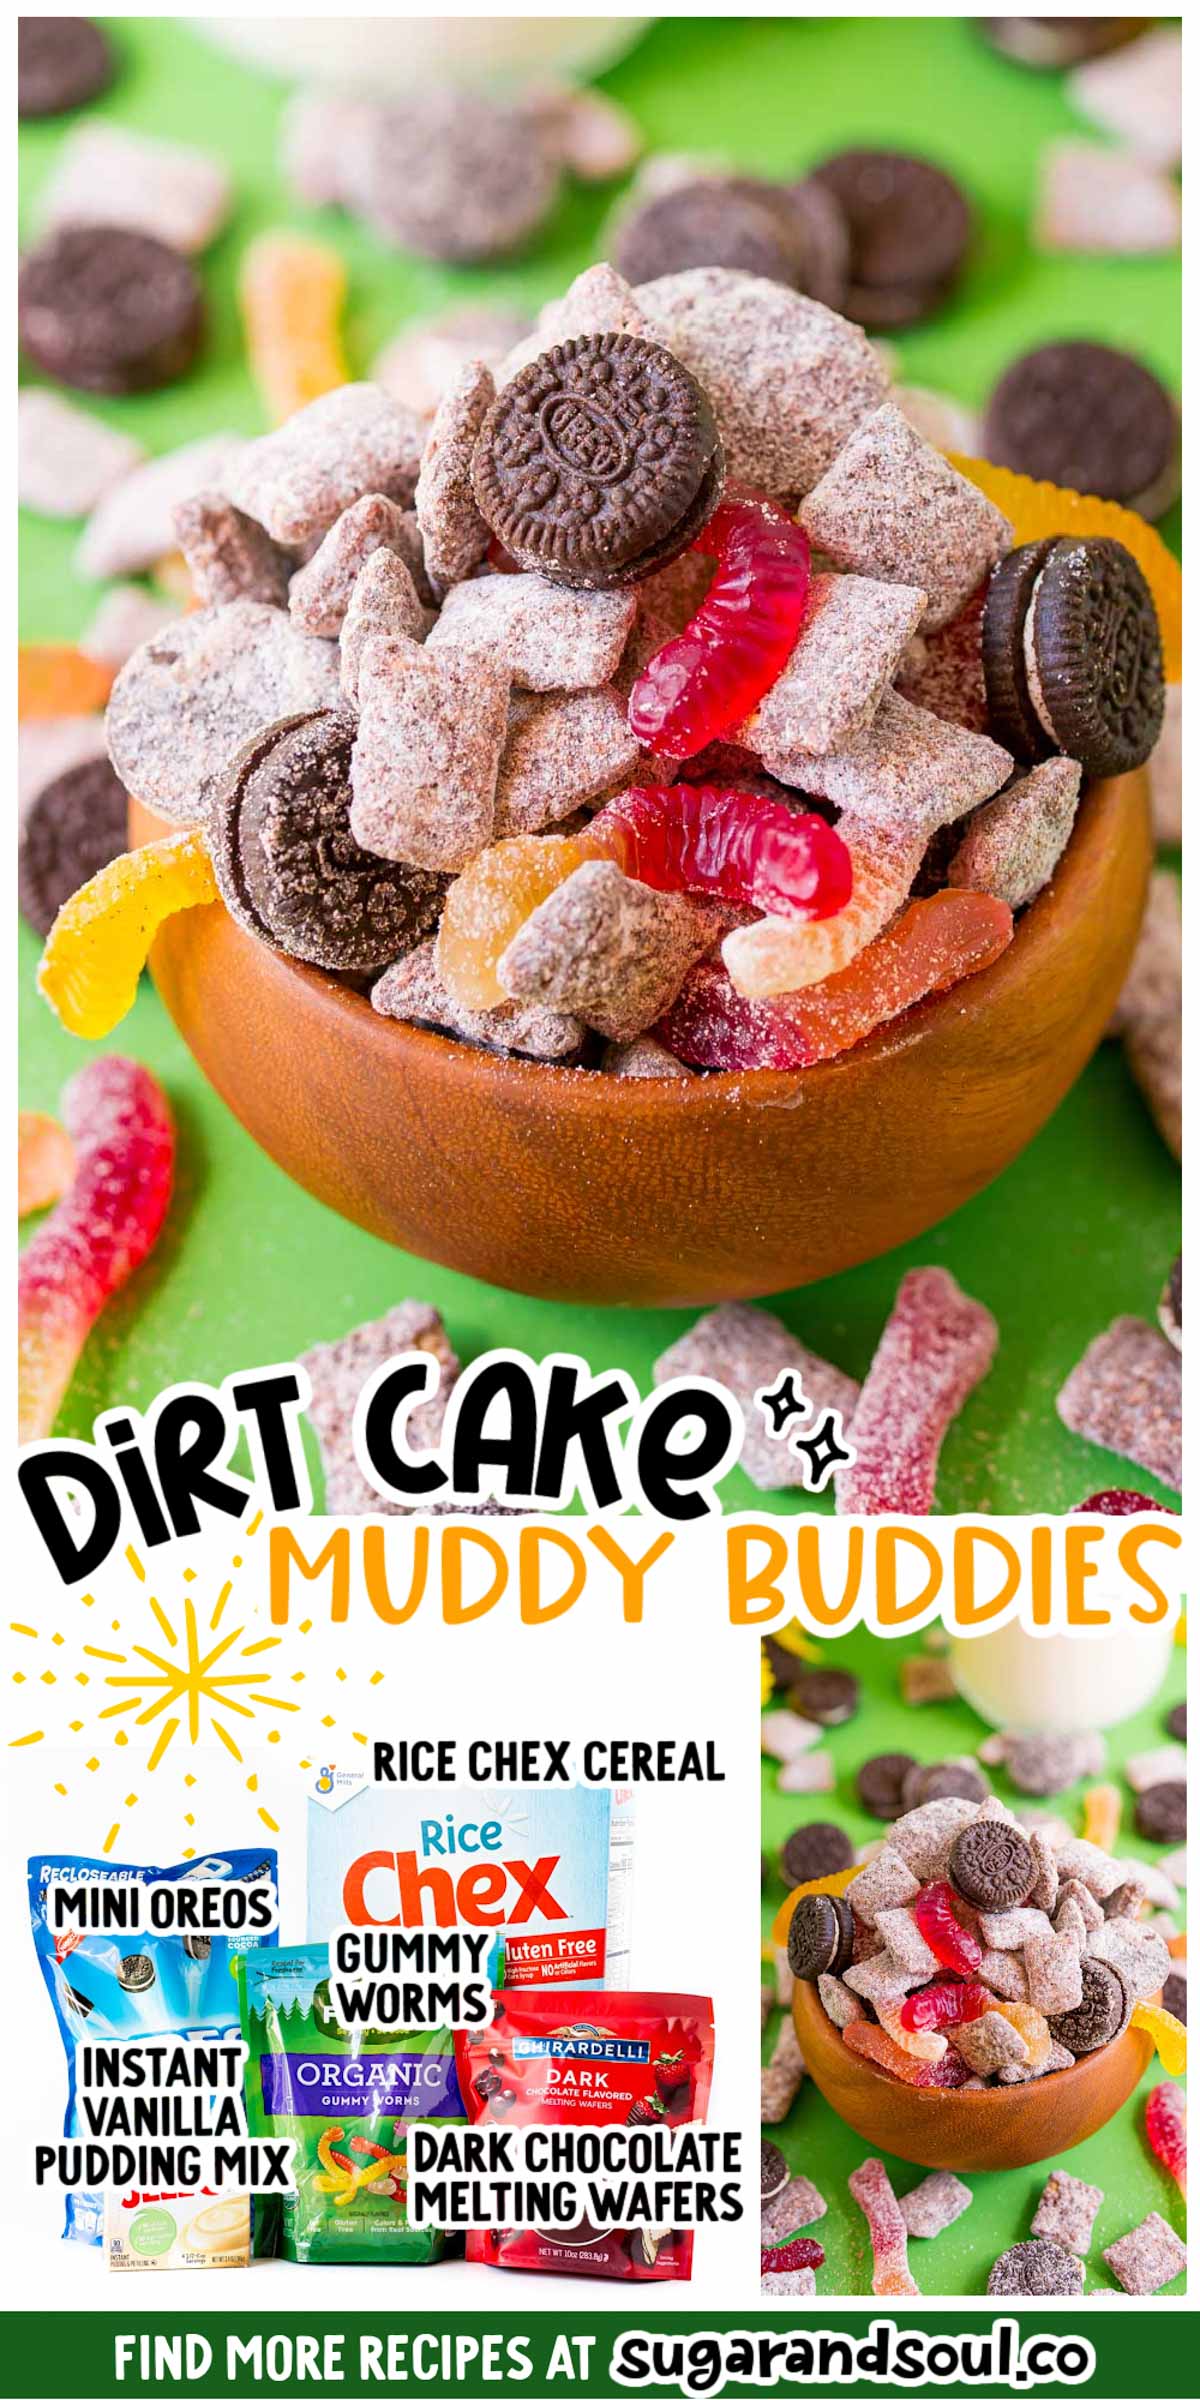 Dirt Cake Muddy Buddies are made with just 5 ingredients for an easy no-bake treat that's ready in minutes! Plus I'm sharing my secret ingredient that makes them oh so good! via @sugarandsoulco